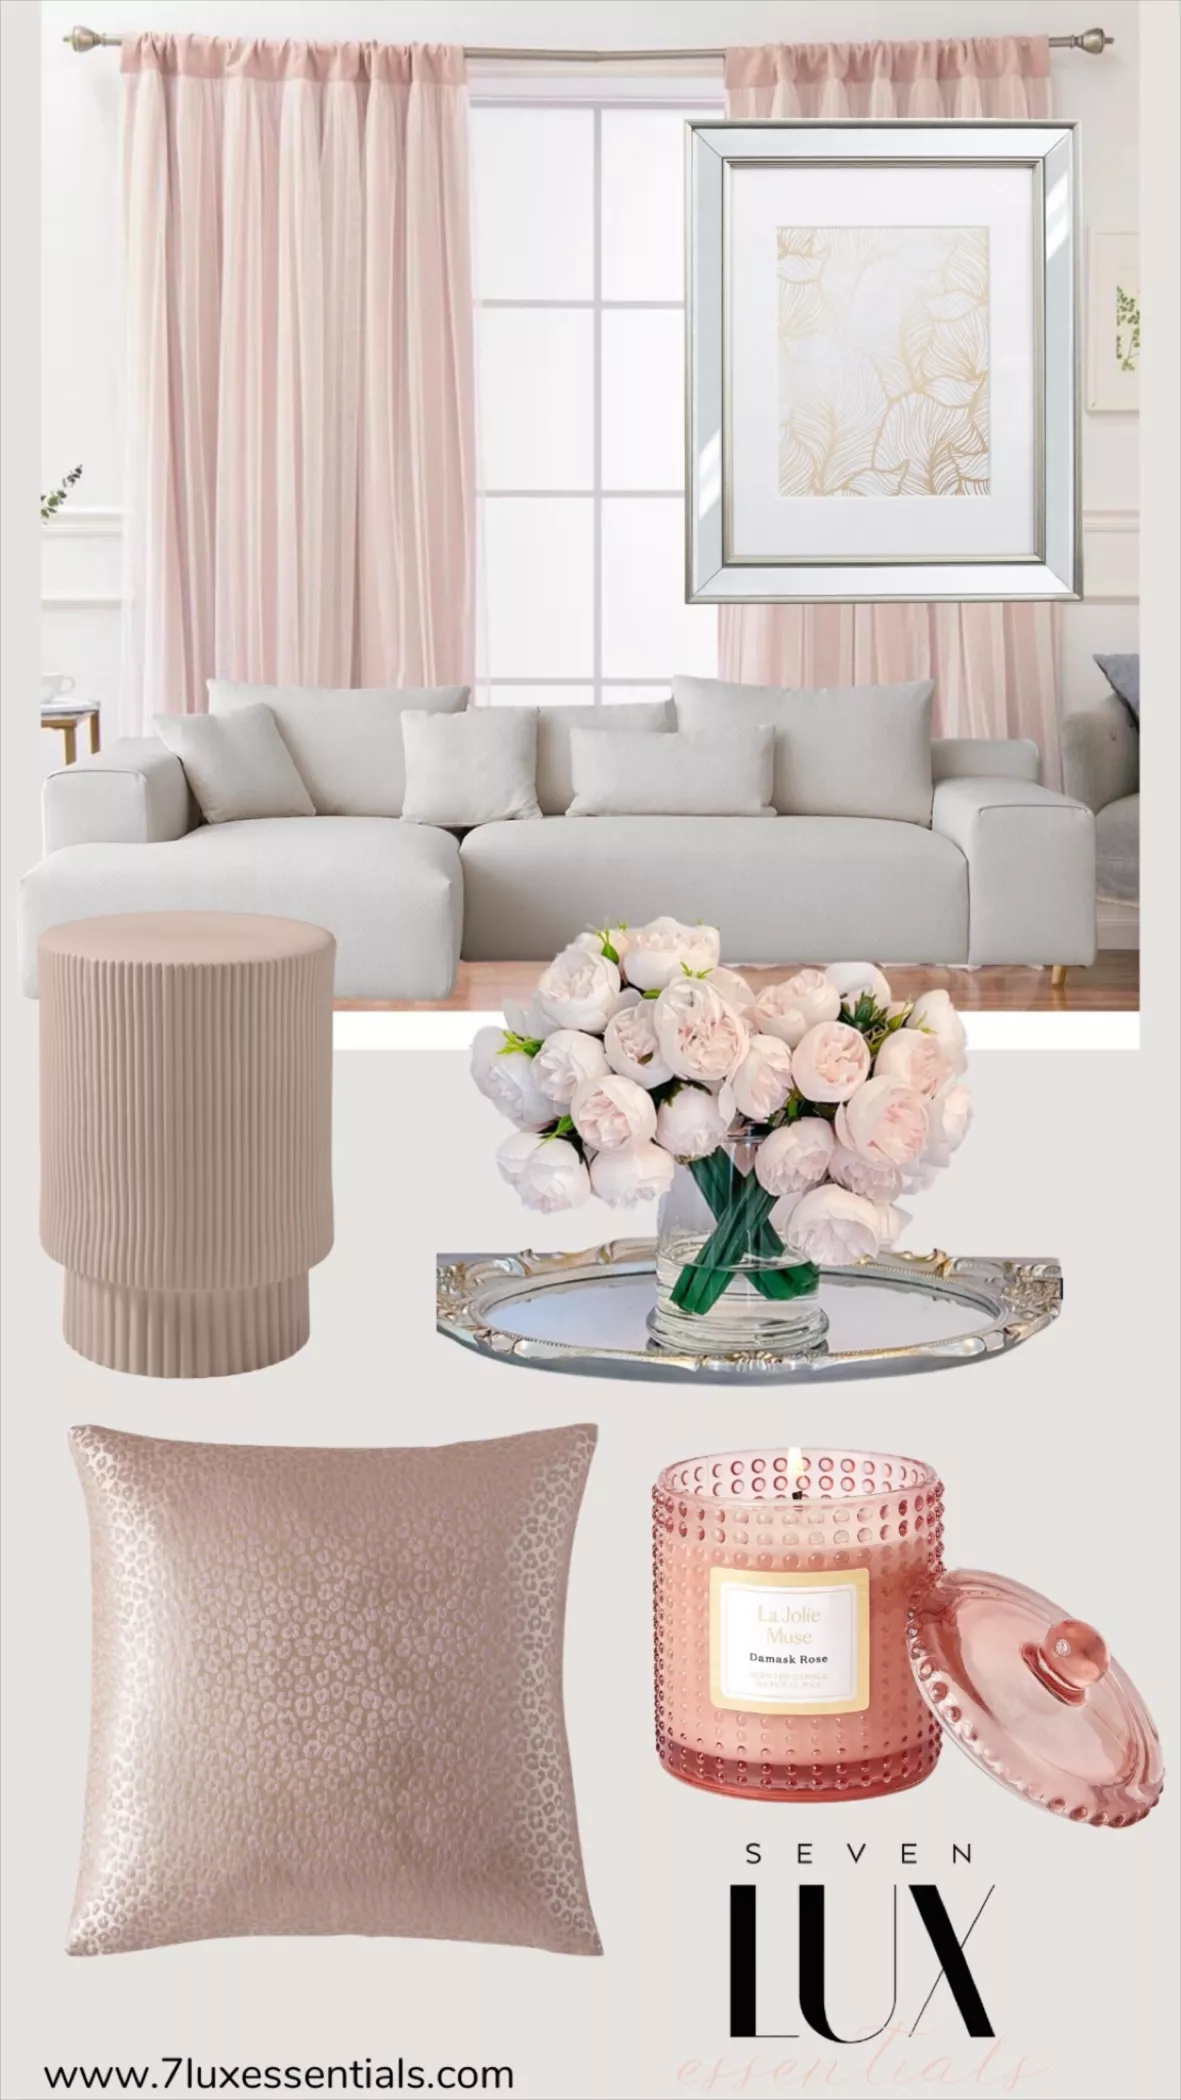 Home Inspiration: Decorating with Blush Pink